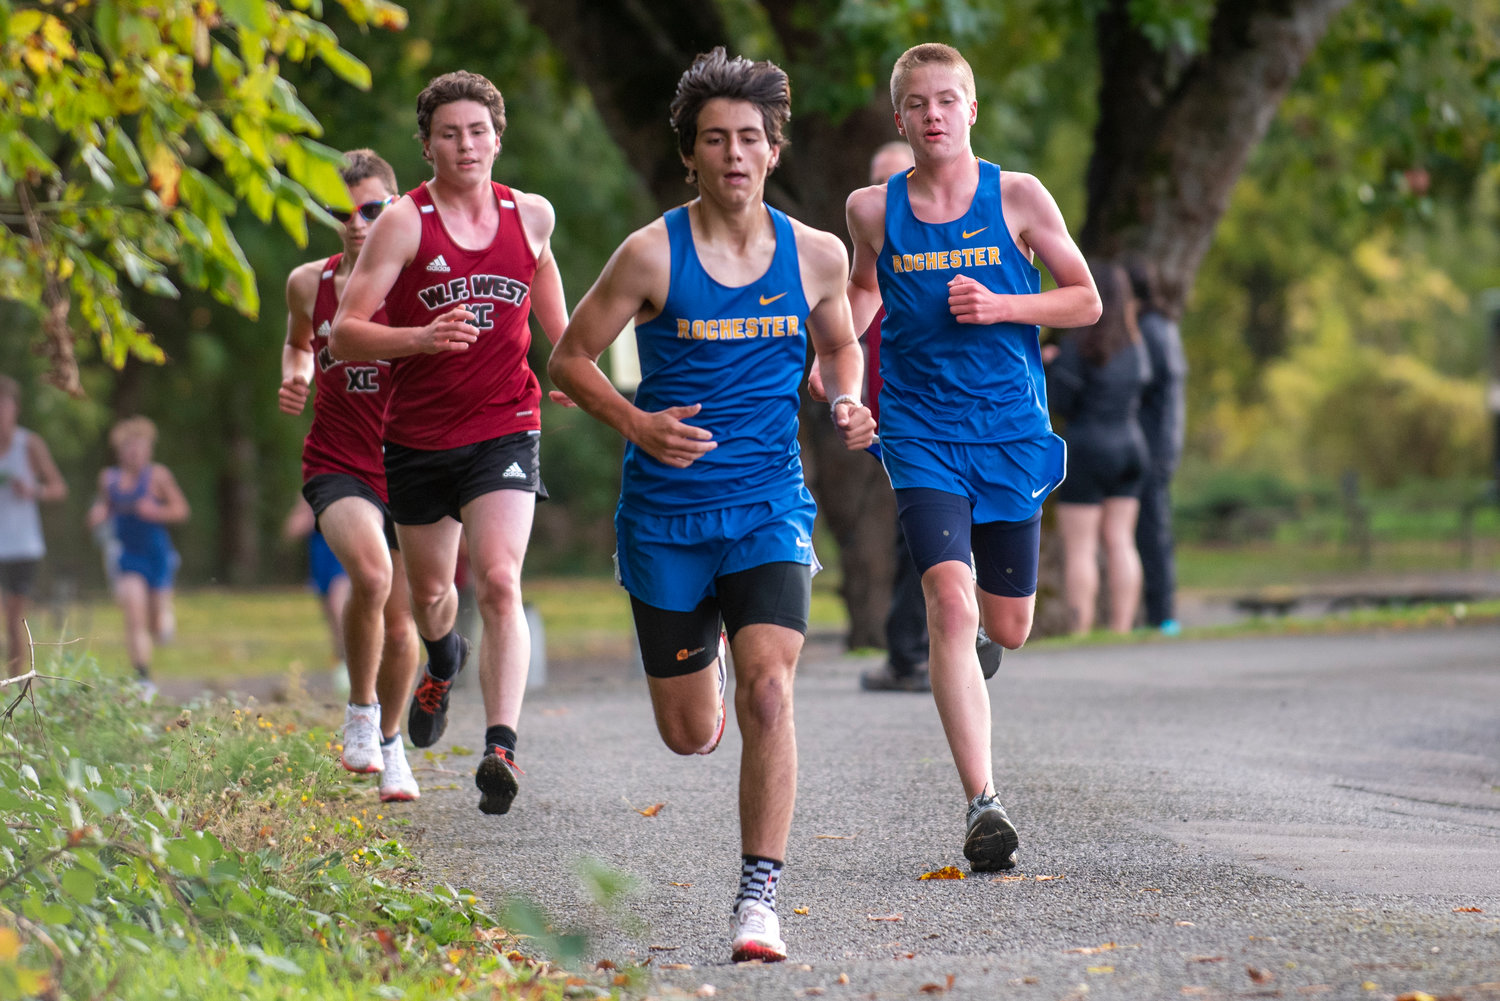 From left, W.F. West's Jaysen Miles, W.F. West's Henry Jordan, Rochester's Gabe Stuard and Rochester's Gunnar Morgan compete at Stan Hedwall Park on Wednesday, Oct. 6, 2021.